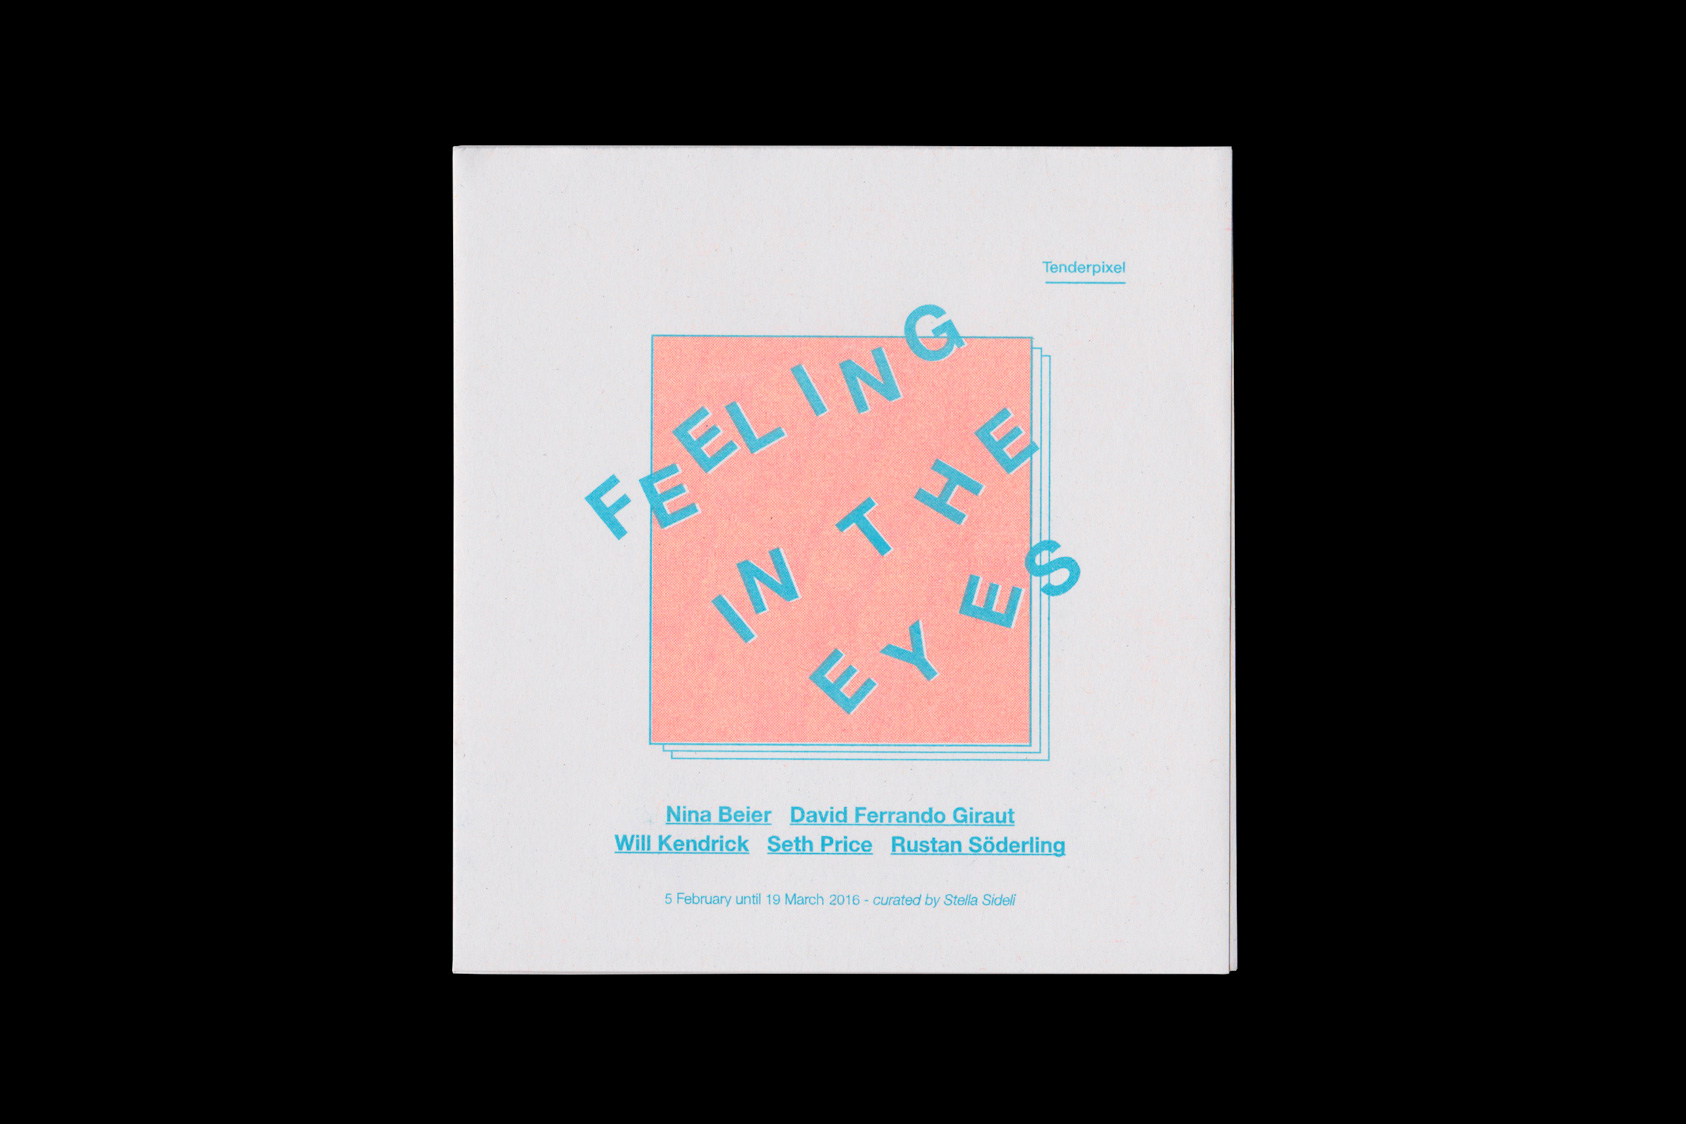 Feeling in The Eyes by the agency for emerging ideas